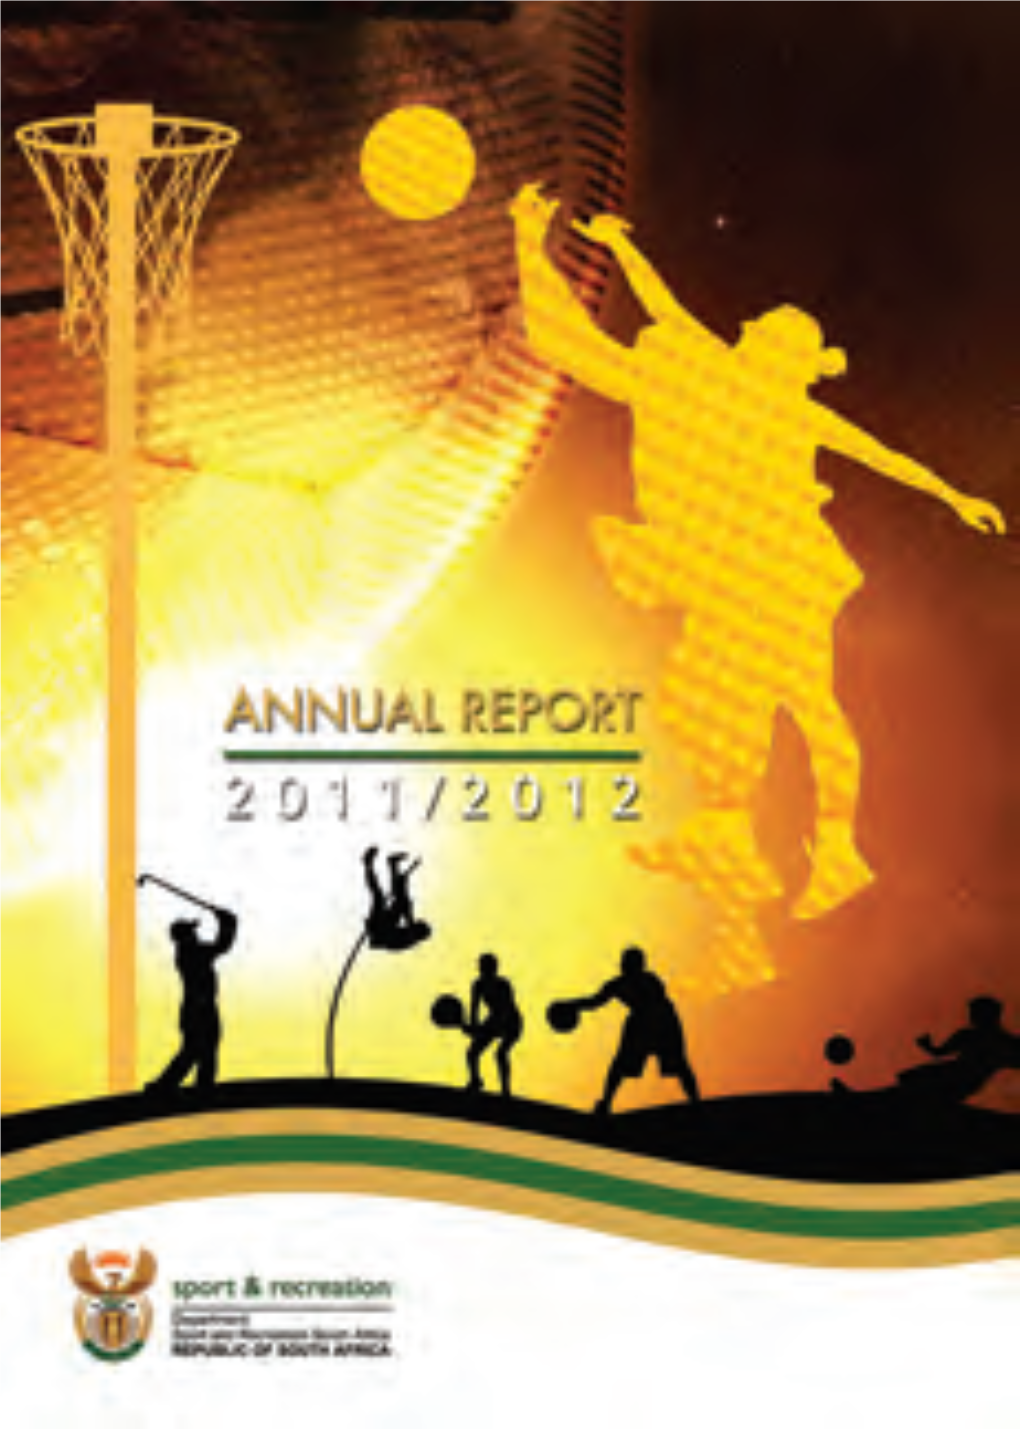 Sport and Recreation South Africa Annual Report 2011/2012